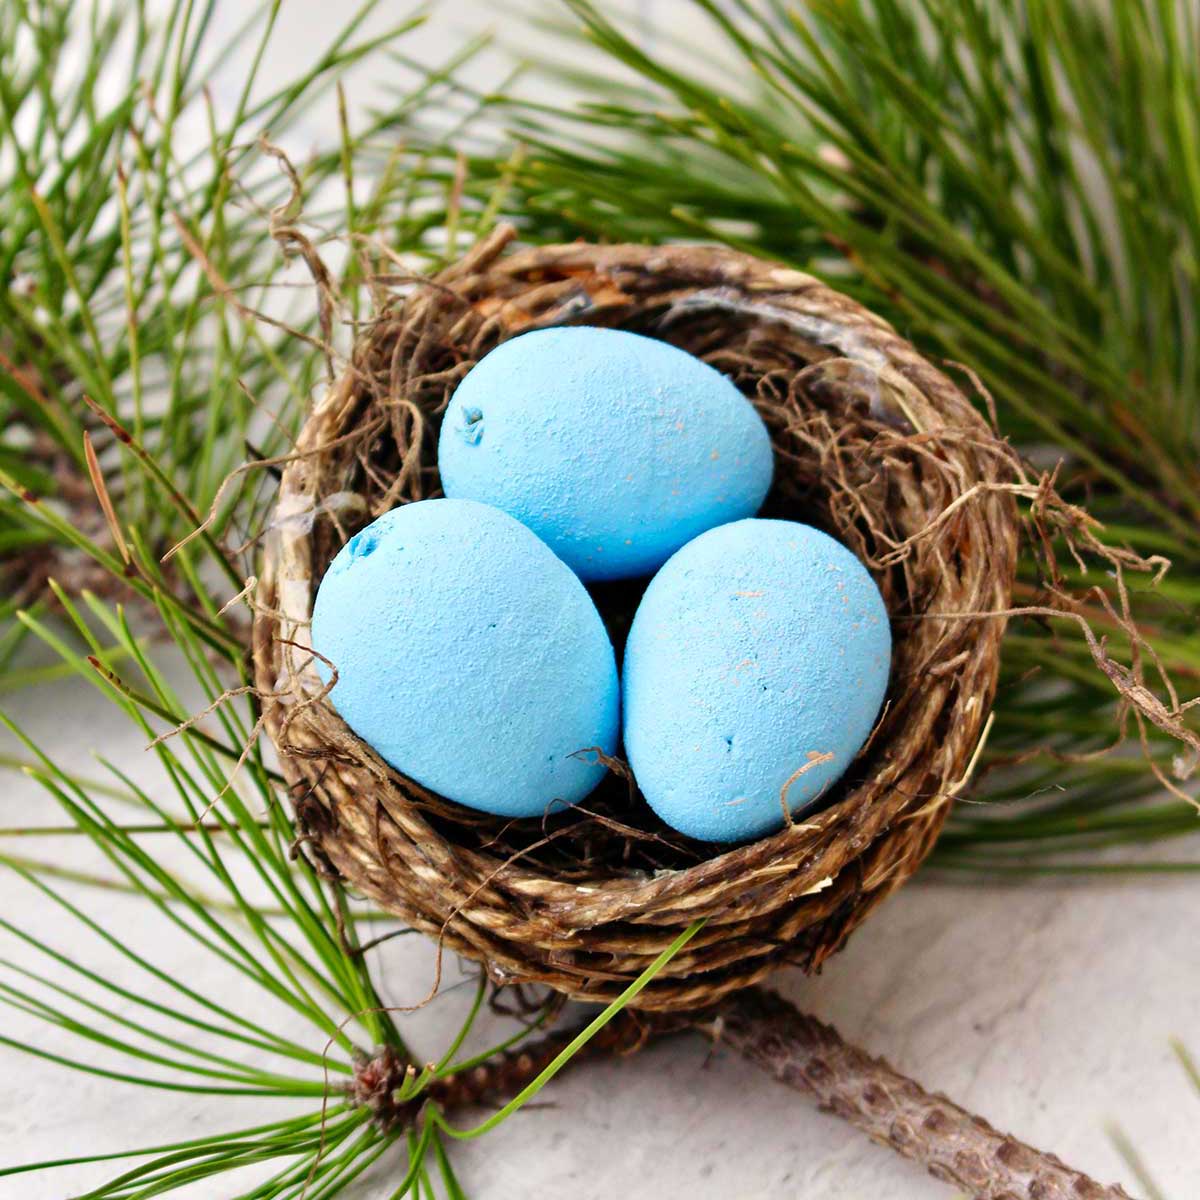 A natural bird nest out of string with three blue eggs inside with some evergreen branches in the background.